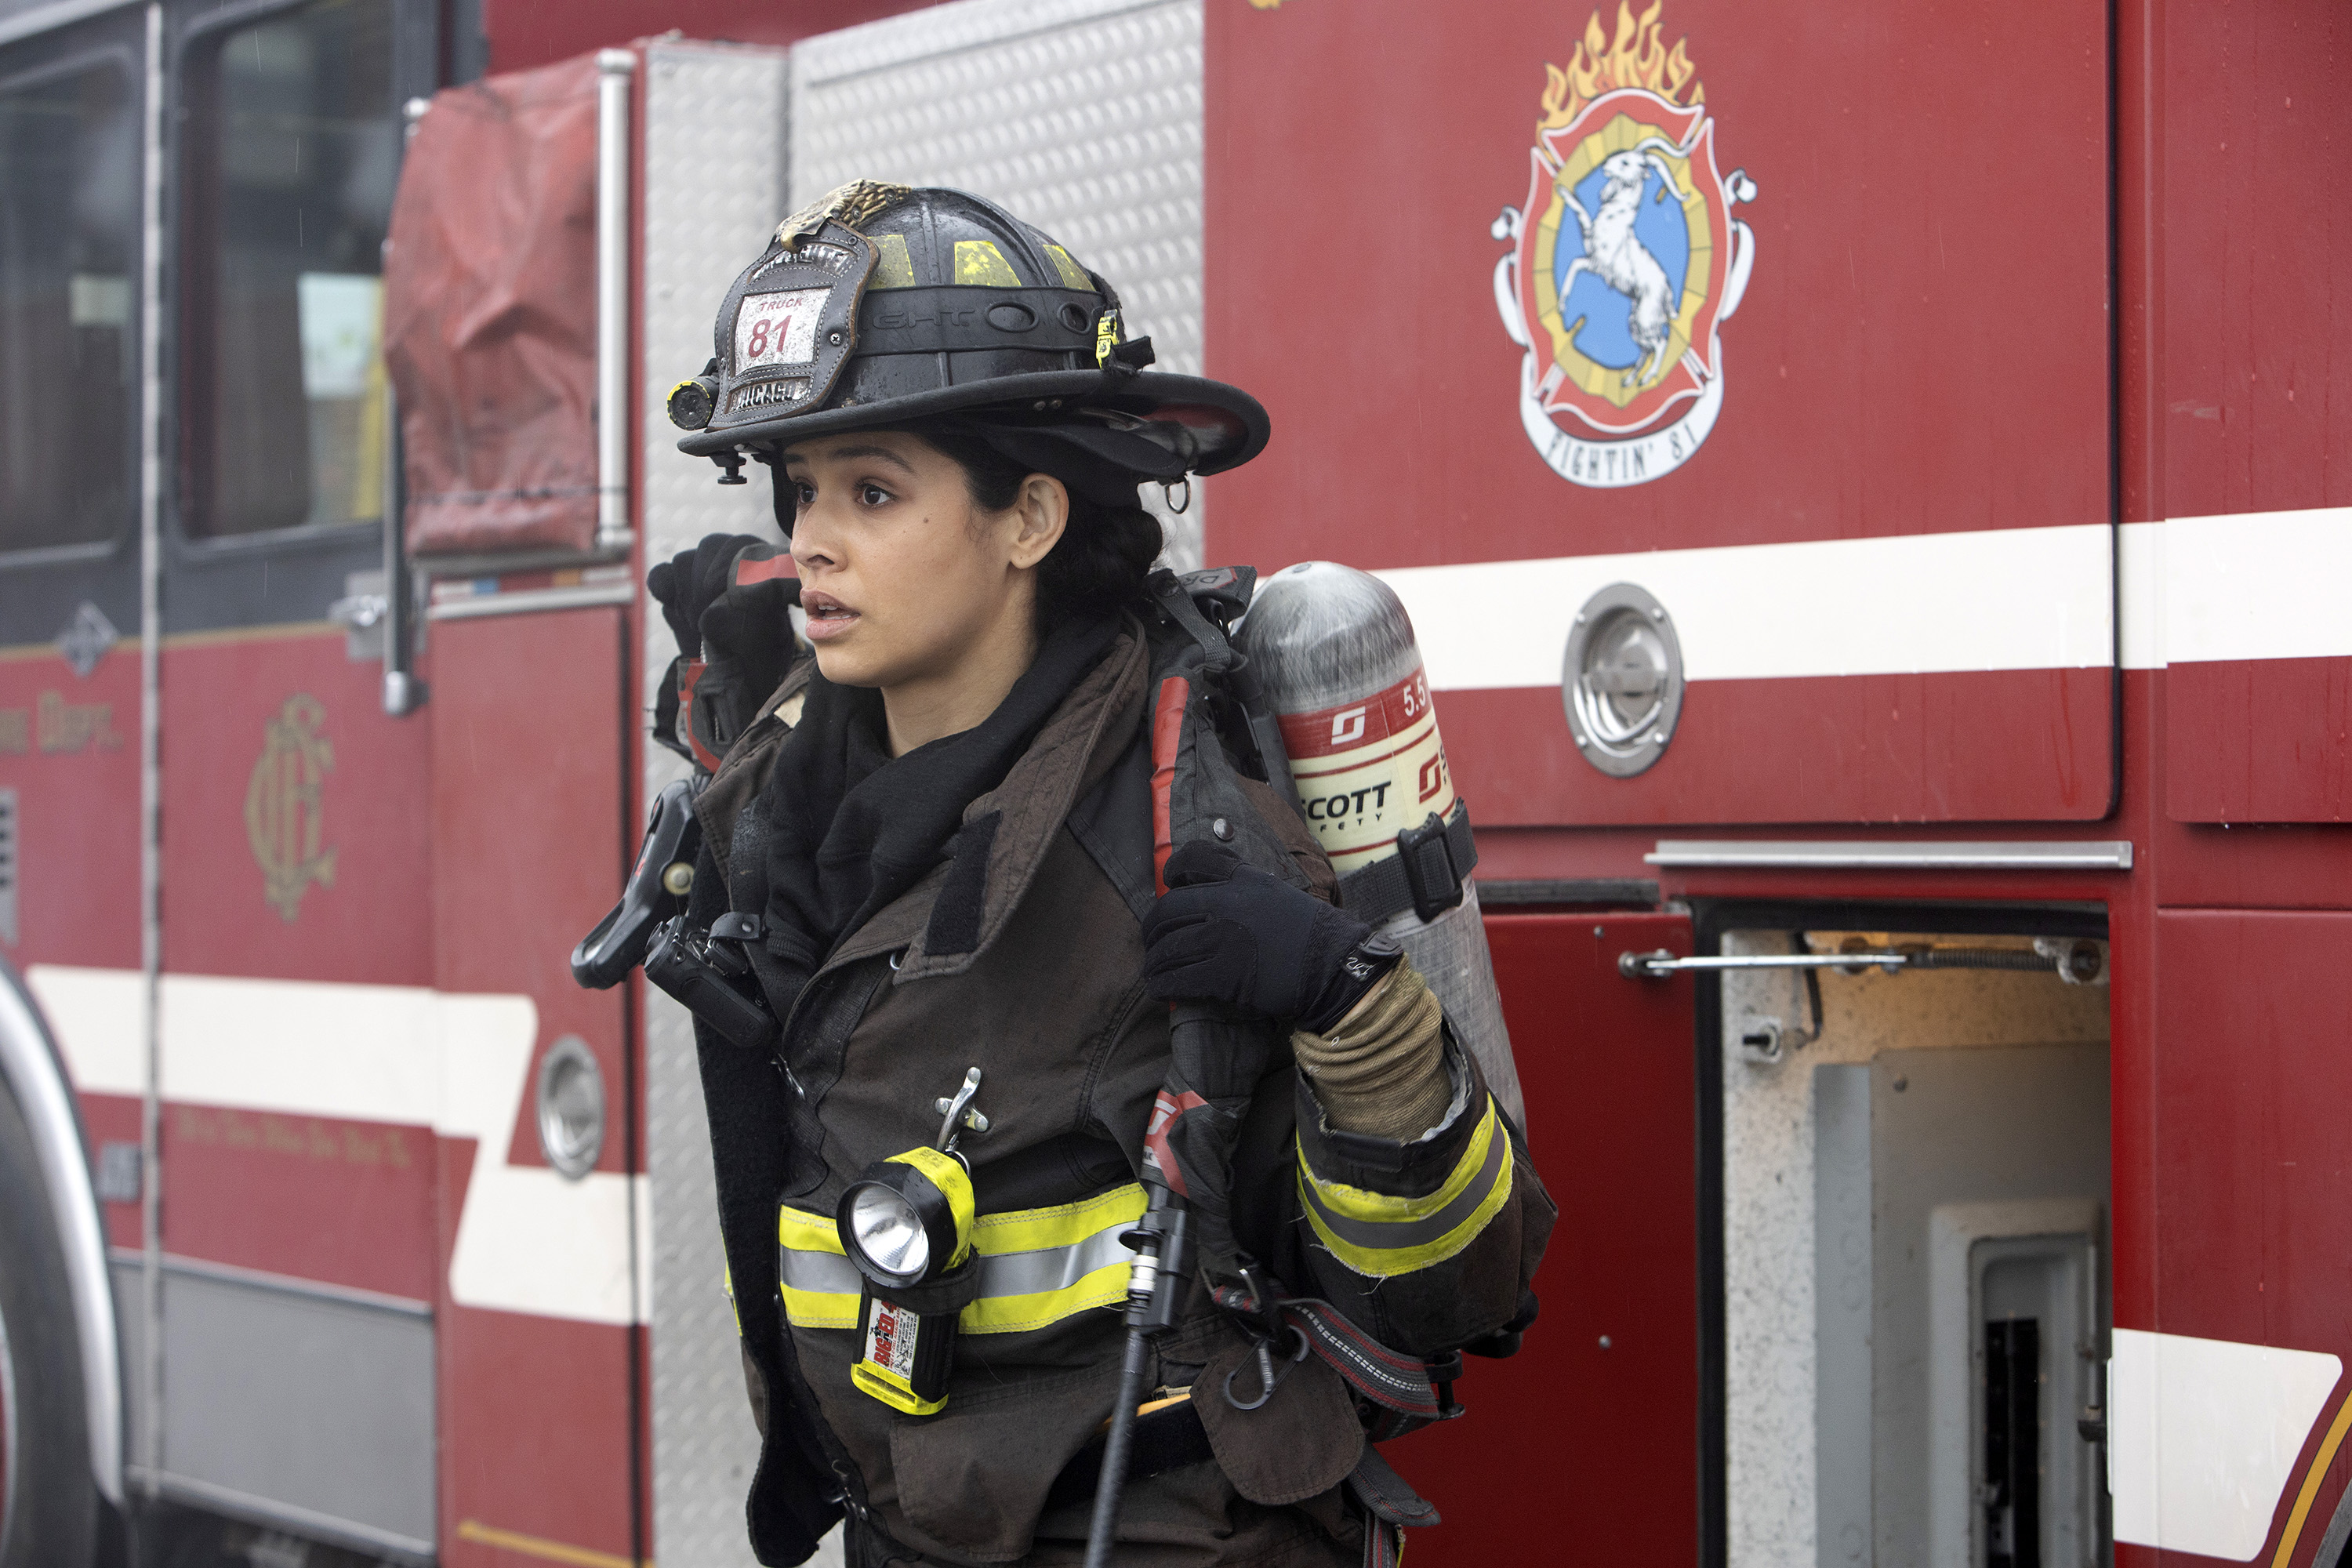 Miranda Rae Mayo as Stella Kidd on 'Chicago Fire' puts on her gear in front of a fire truck.